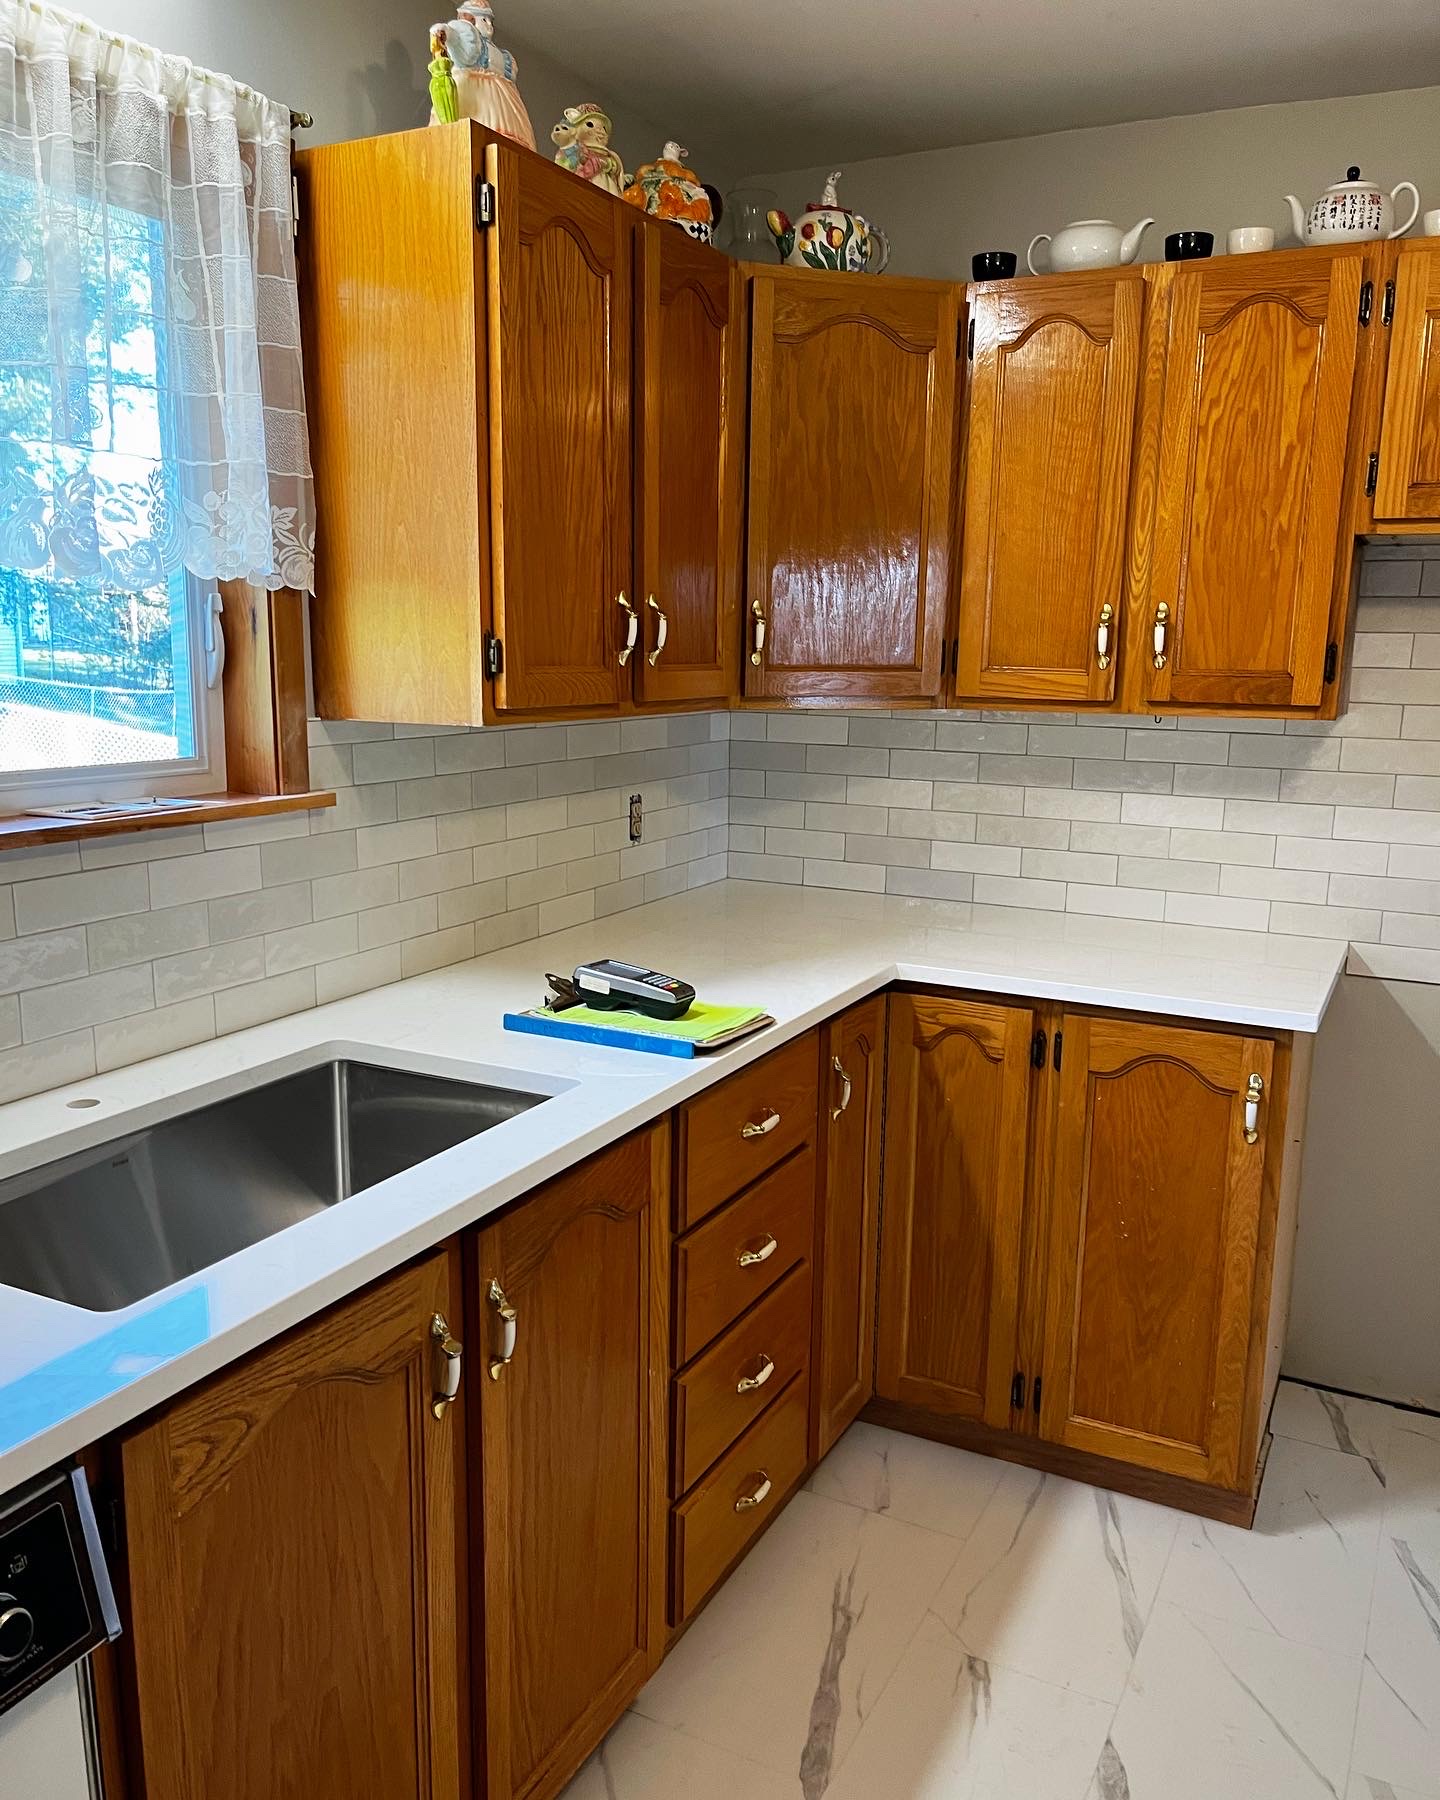 Anew Quartz countertop to brighten this classic kitchen look with a subway tile backsplash and undermount sink